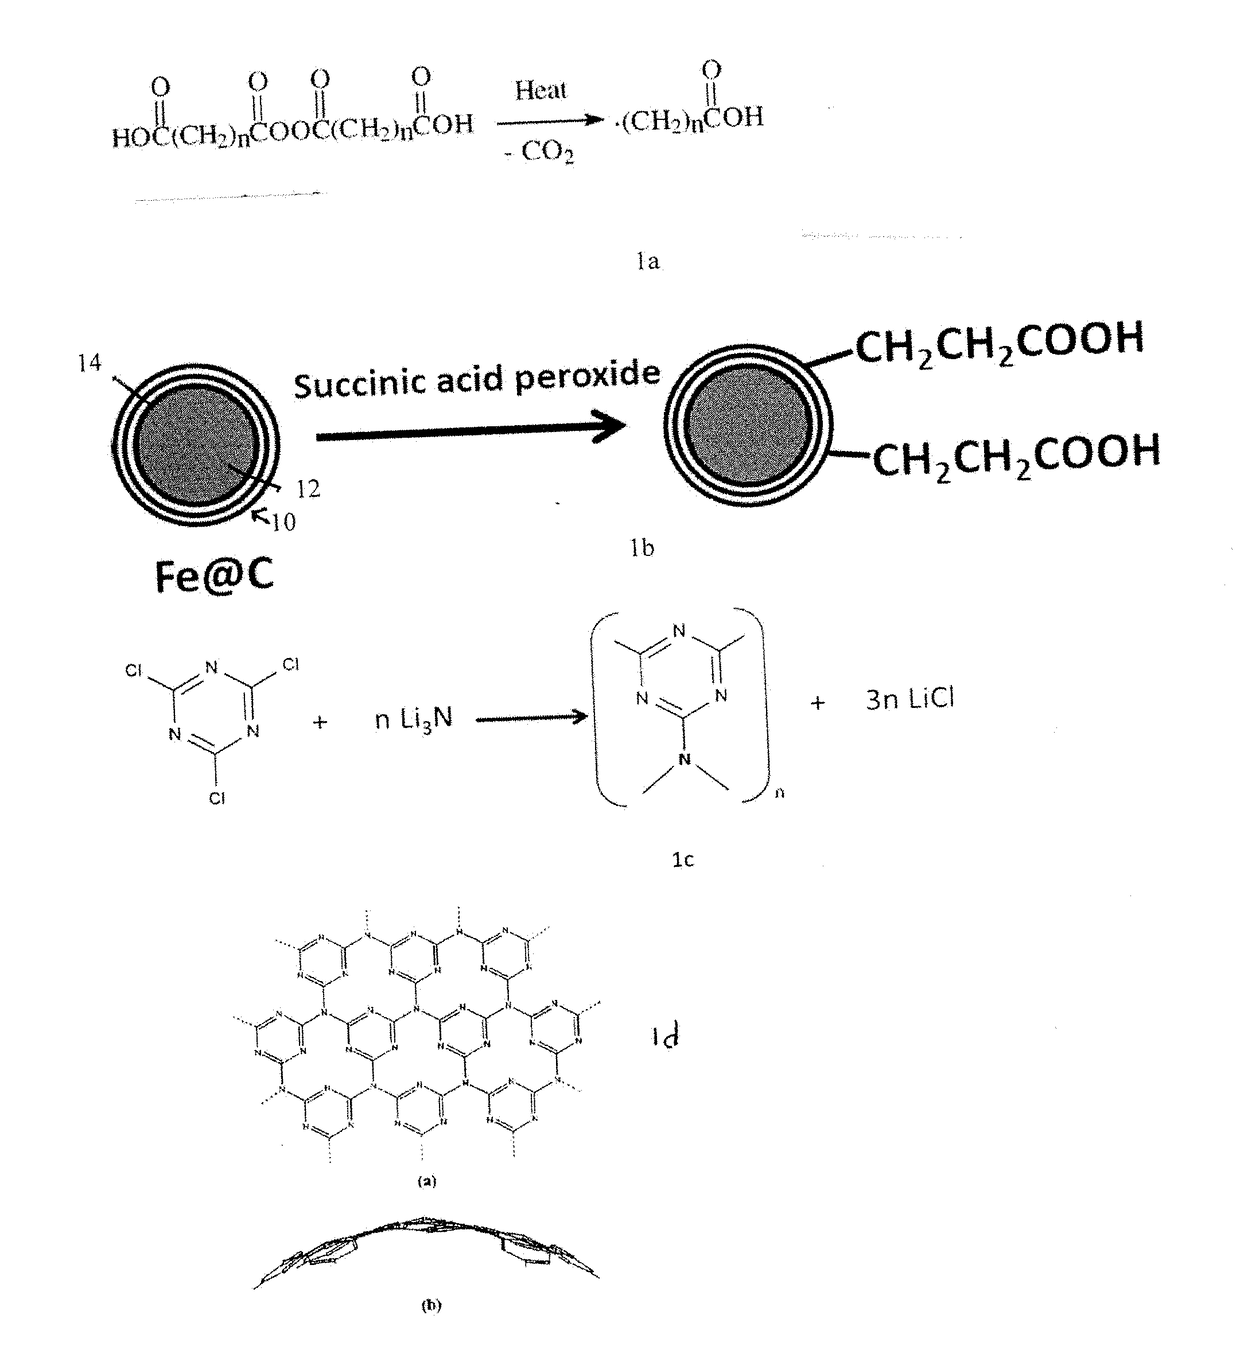 Hybrid Fluorescence Magnetic Core-Shell Nanoparticles for Use in Oil and Gas Applications